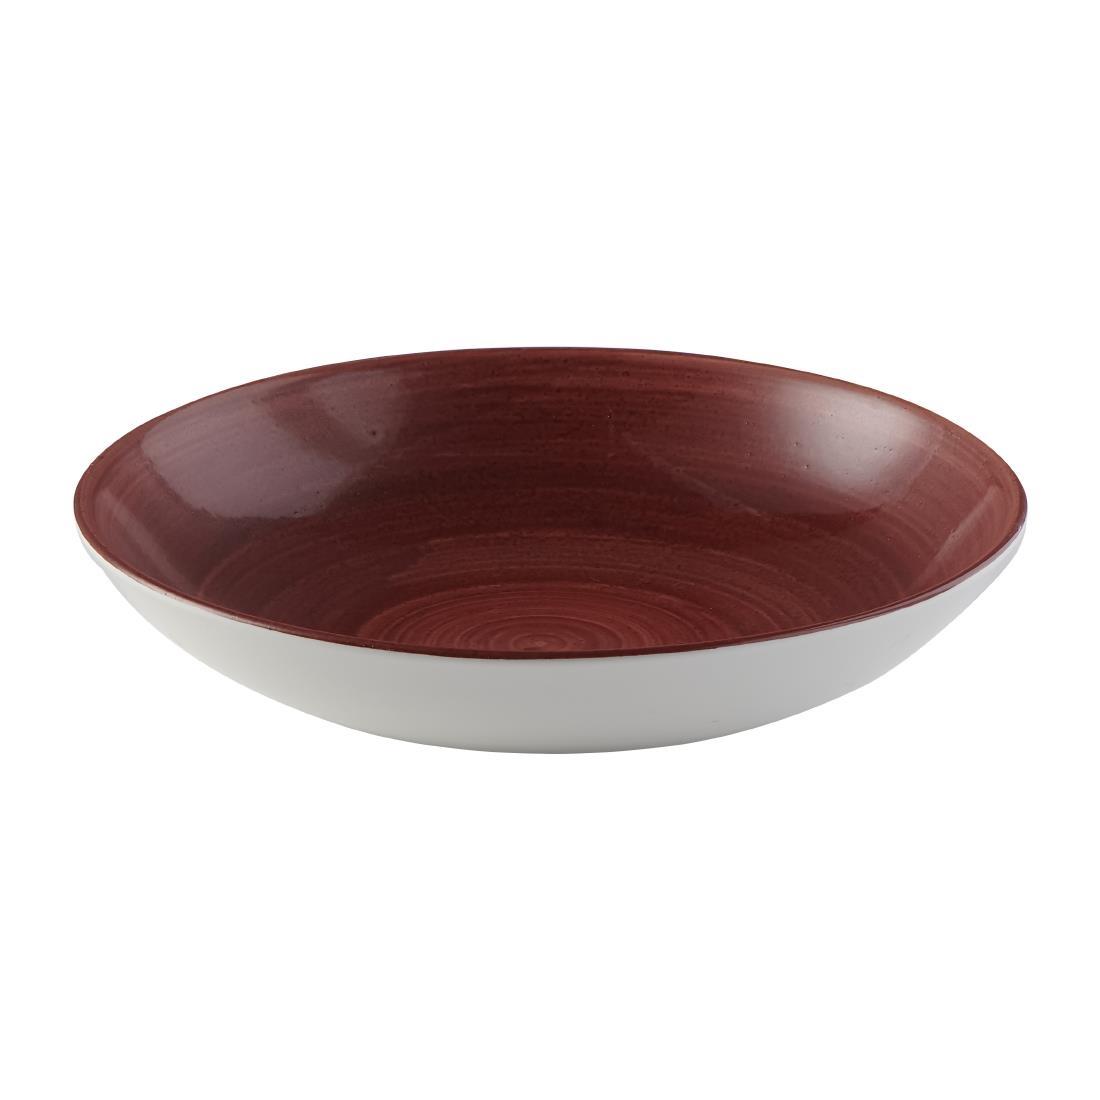 Churchill Stonecast Patina Evolve Coupe Bowl Red Rust 248mm (Pack of 12) - FS884  - 2